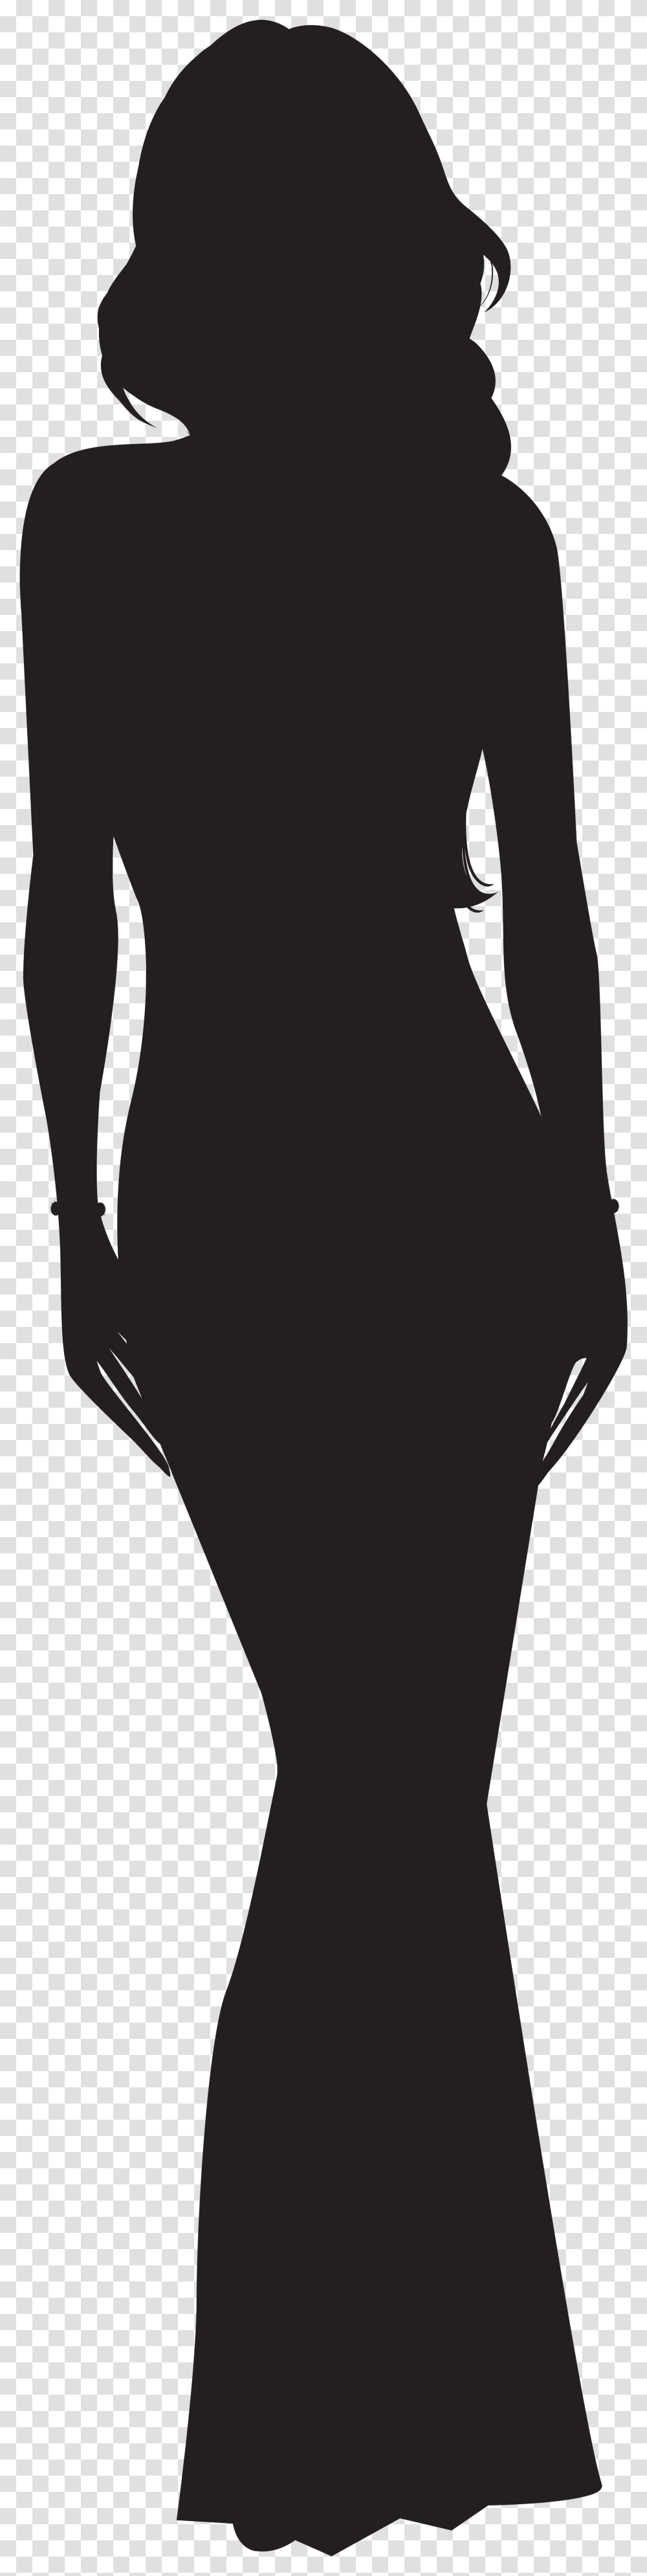 Woman Silhouette Clip Art Image Woman Clipart Silhouette, Sleeve, Long Sleeve, Person Transparent Png